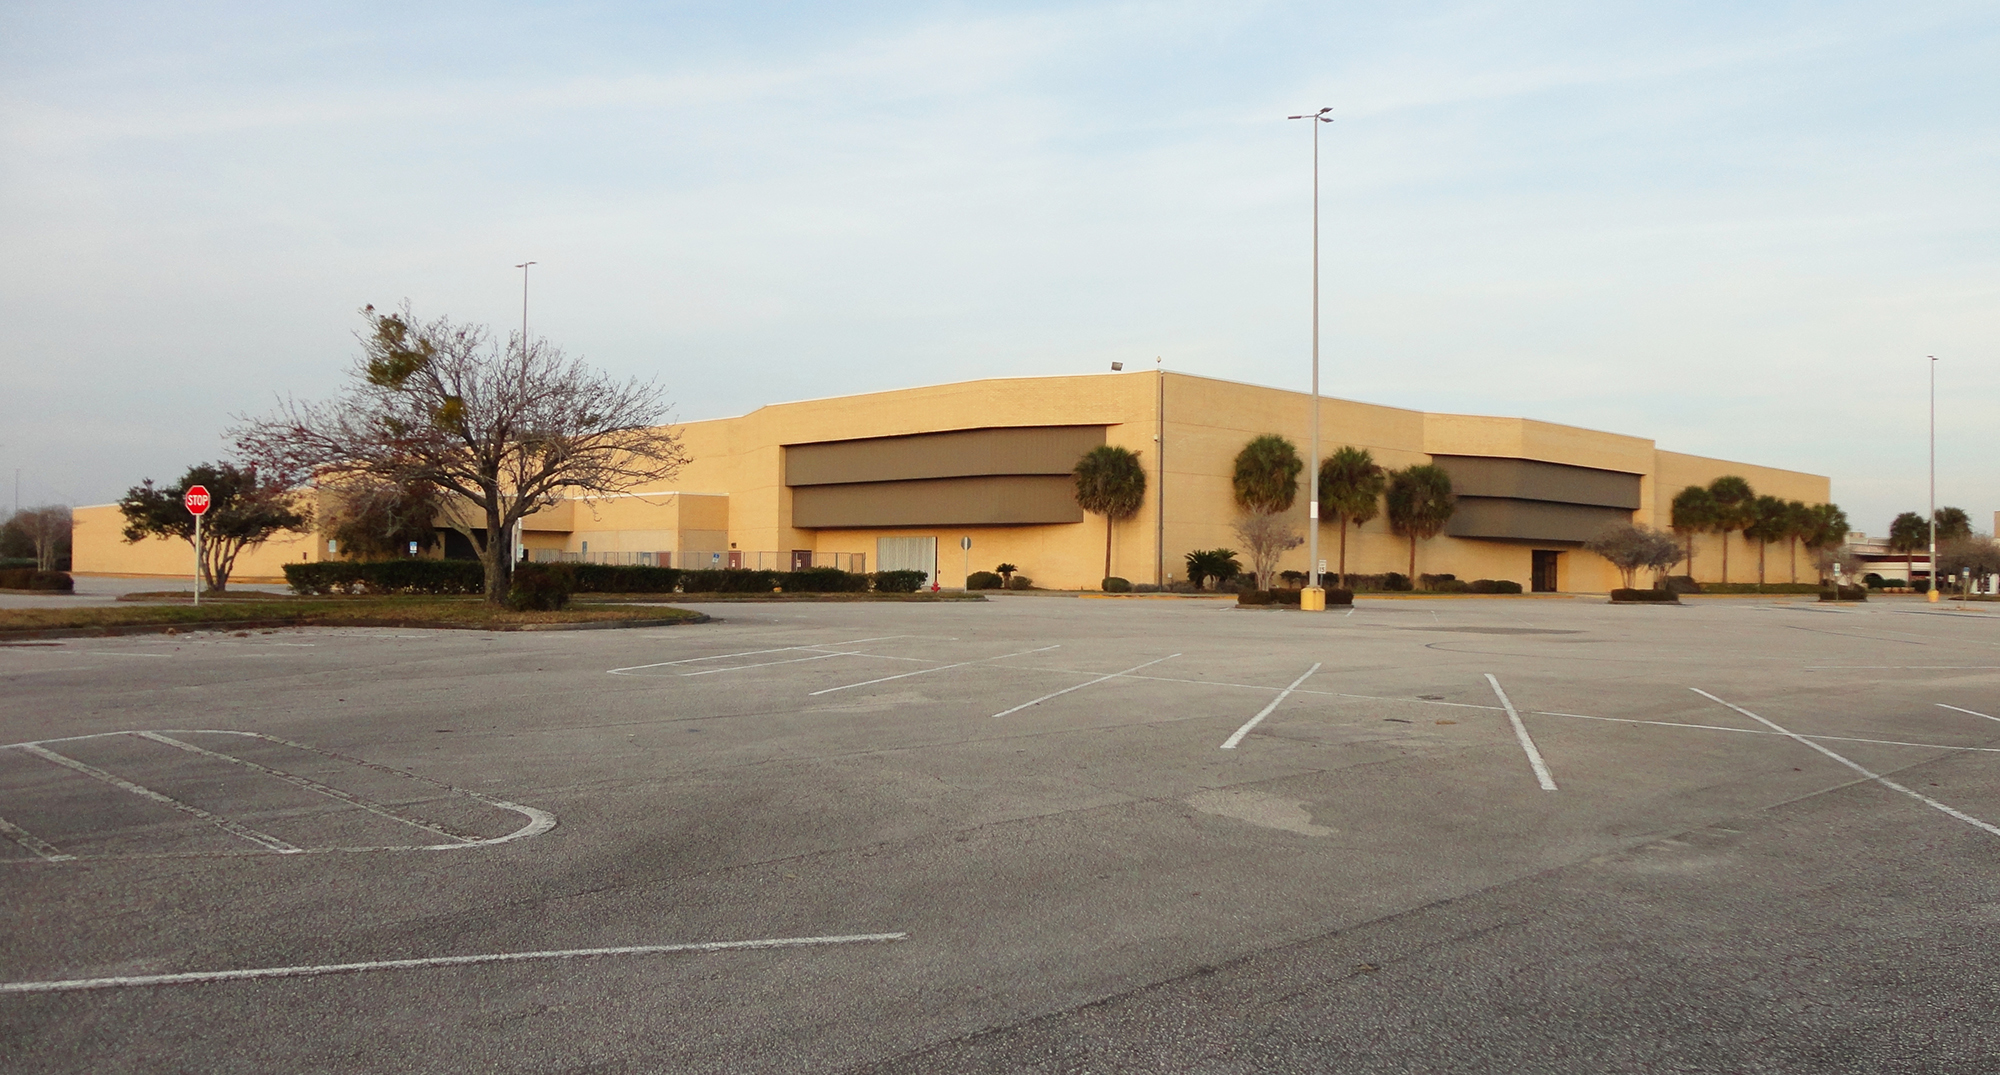 Sears closed the store it leased at The Avenues mall in 2019.